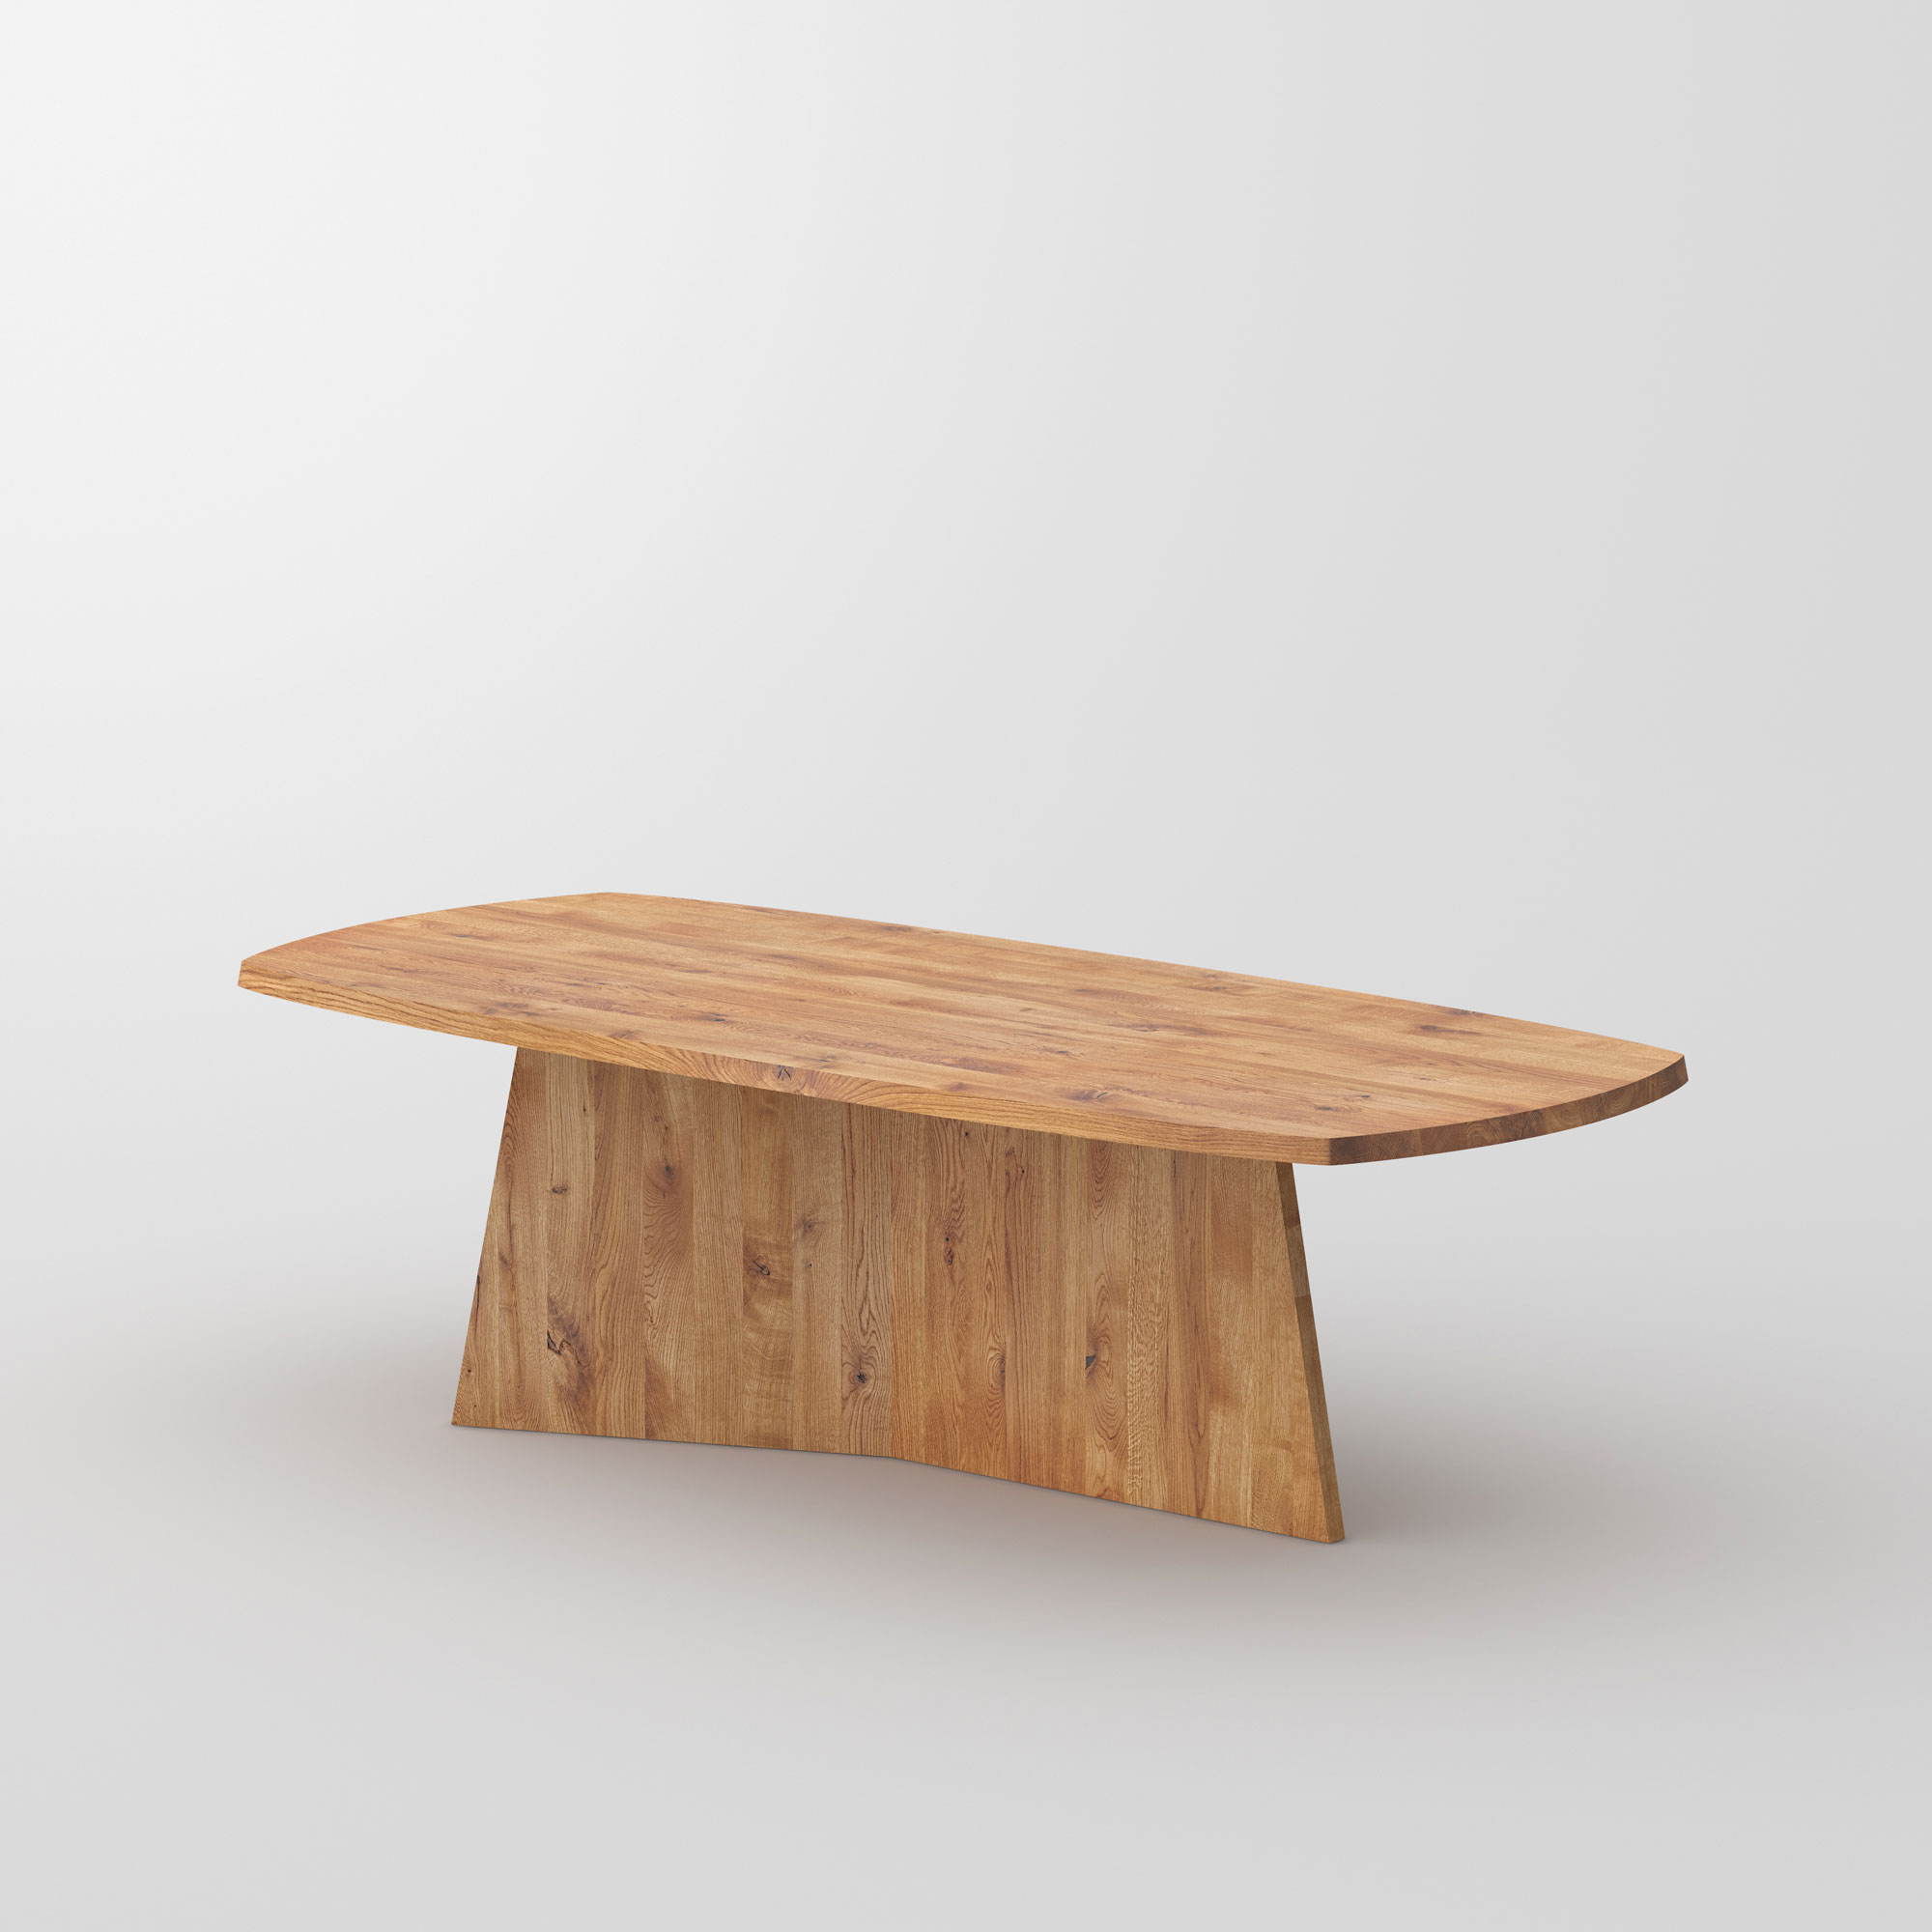 Design Dining Table LOTUS cam2 custom made in solid wood by vitamin design